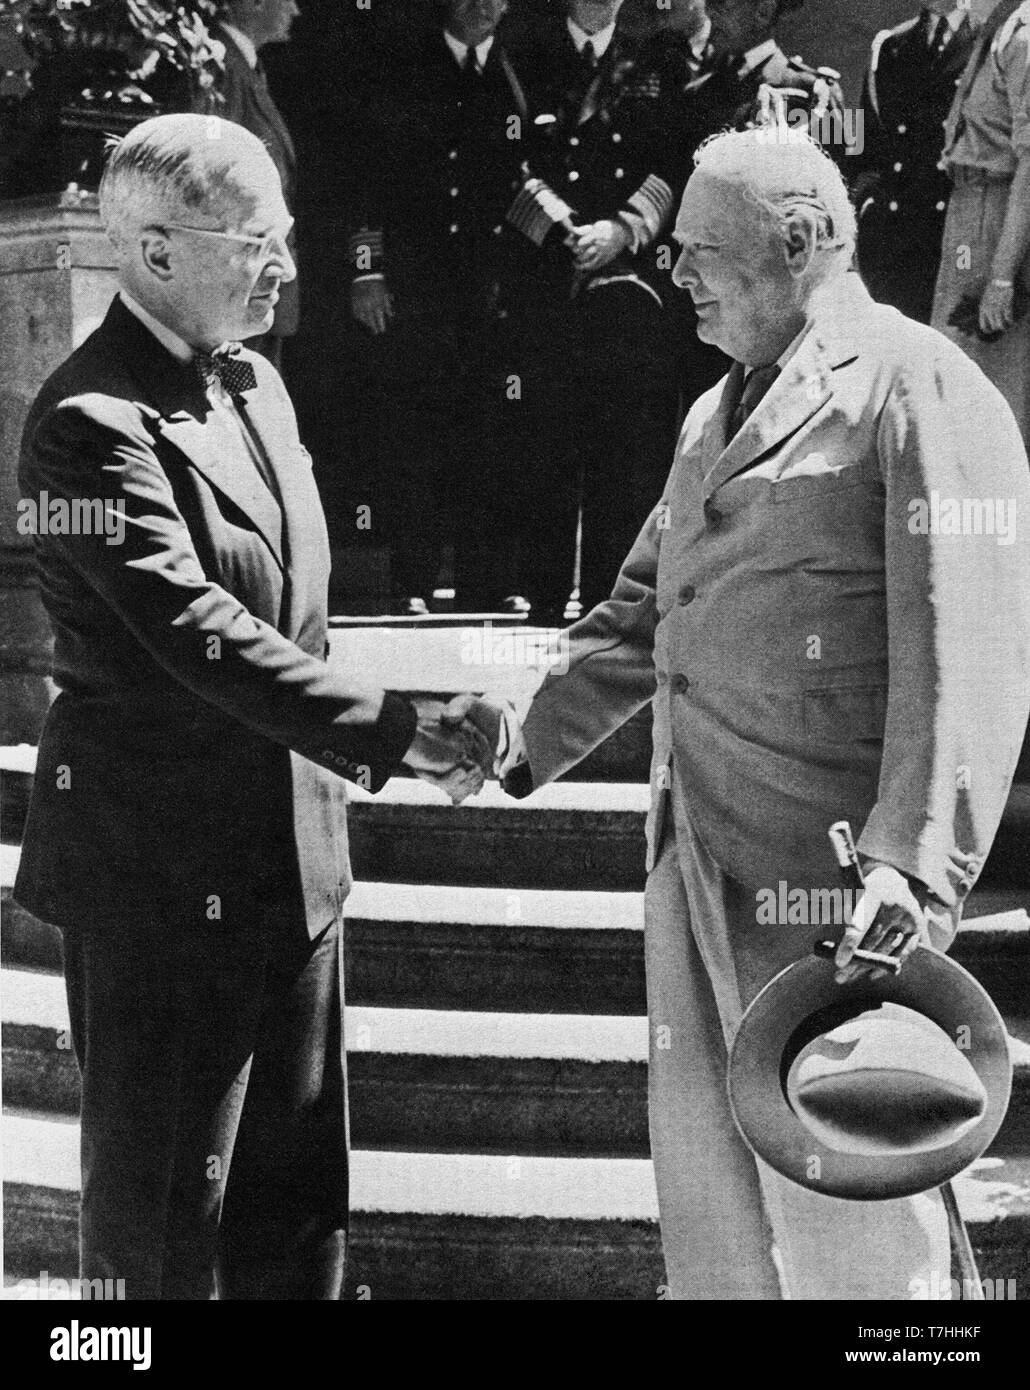 Winston Churchill  shaking hands with new President of the United States, Harry S. Truman at the Potsdam Conference. Stock Photo